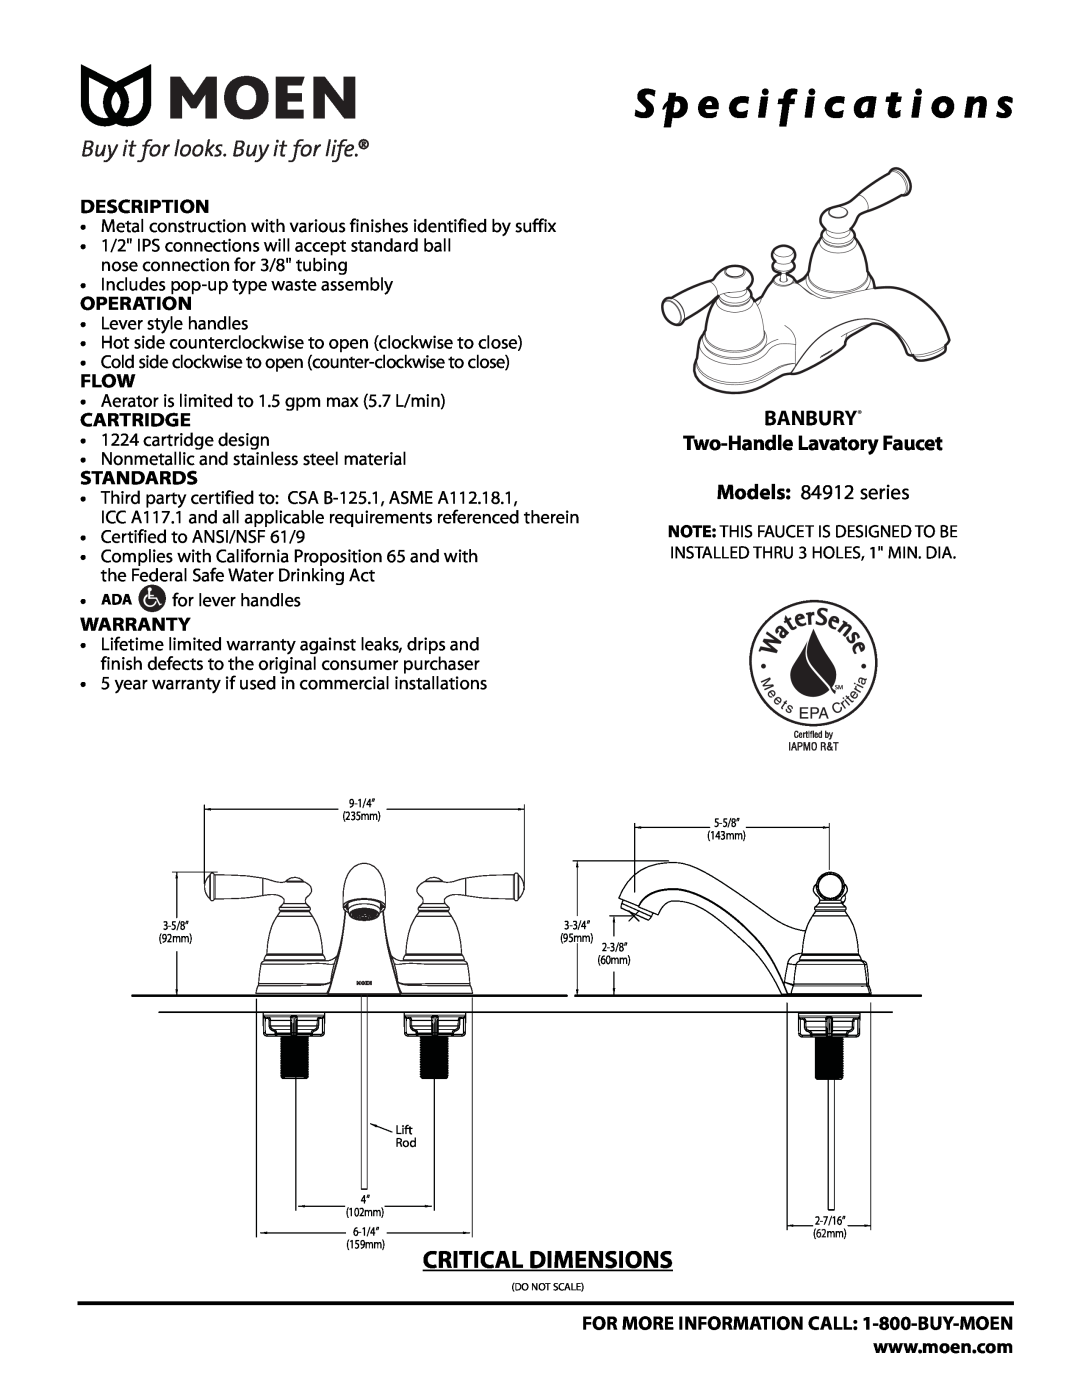 Moen 84912 Series specifications S p e c i f i c a t i o n s, Critical Dimensions, BANBURY Two-Handle Lavatory Faucet 